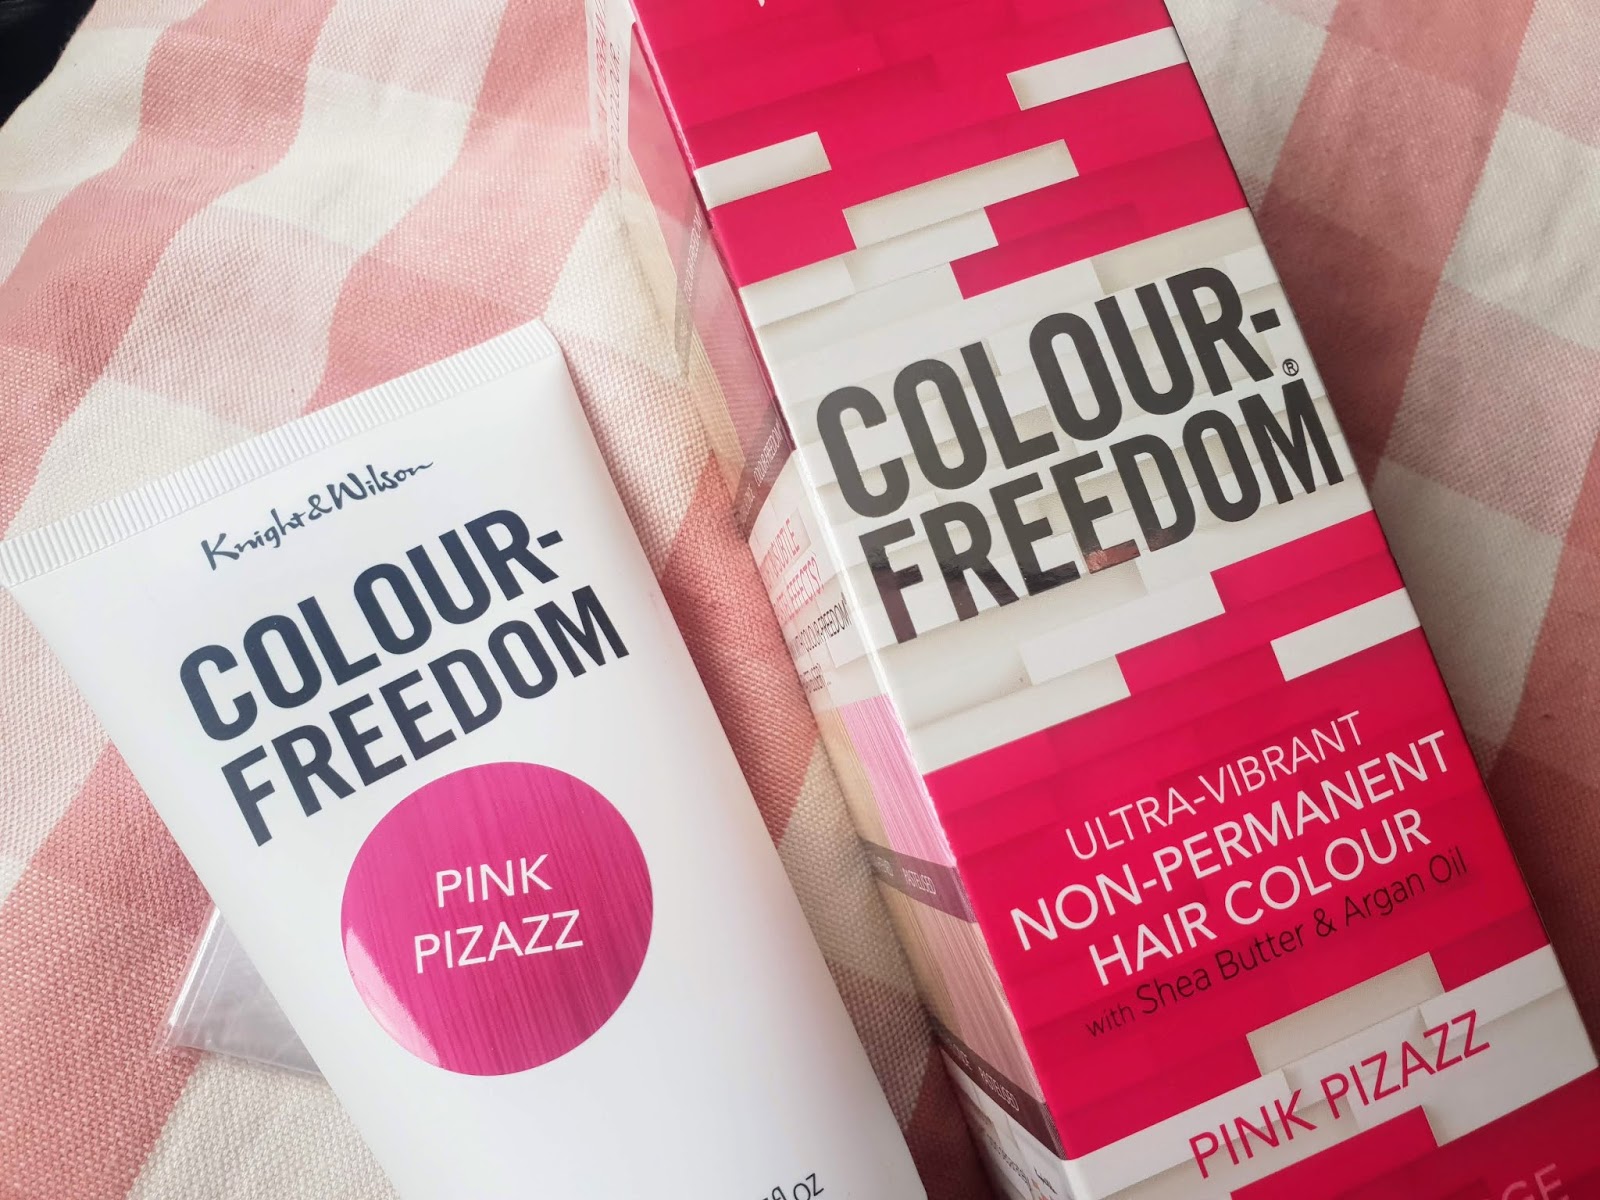 Colour Freedom Pink Pizazz | Review